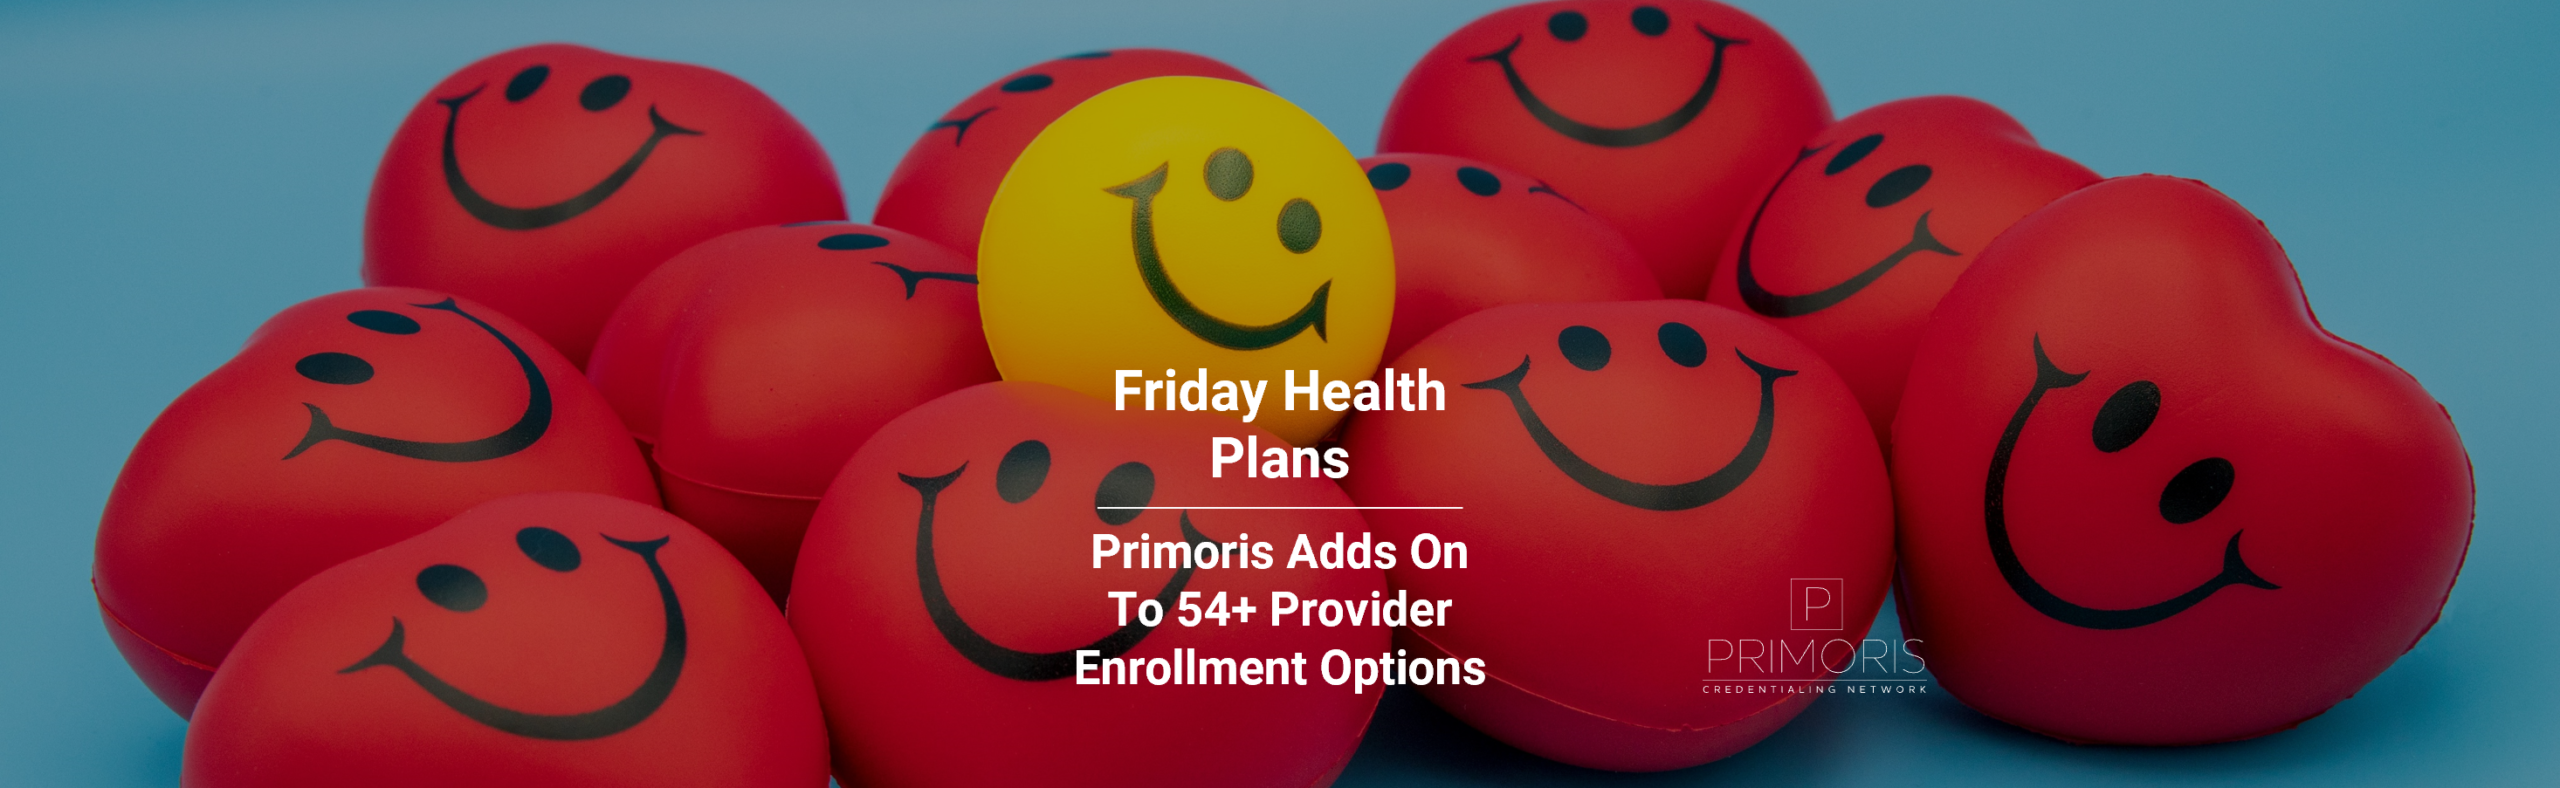 Primoris Adds Friday Health Plans to Payor Options